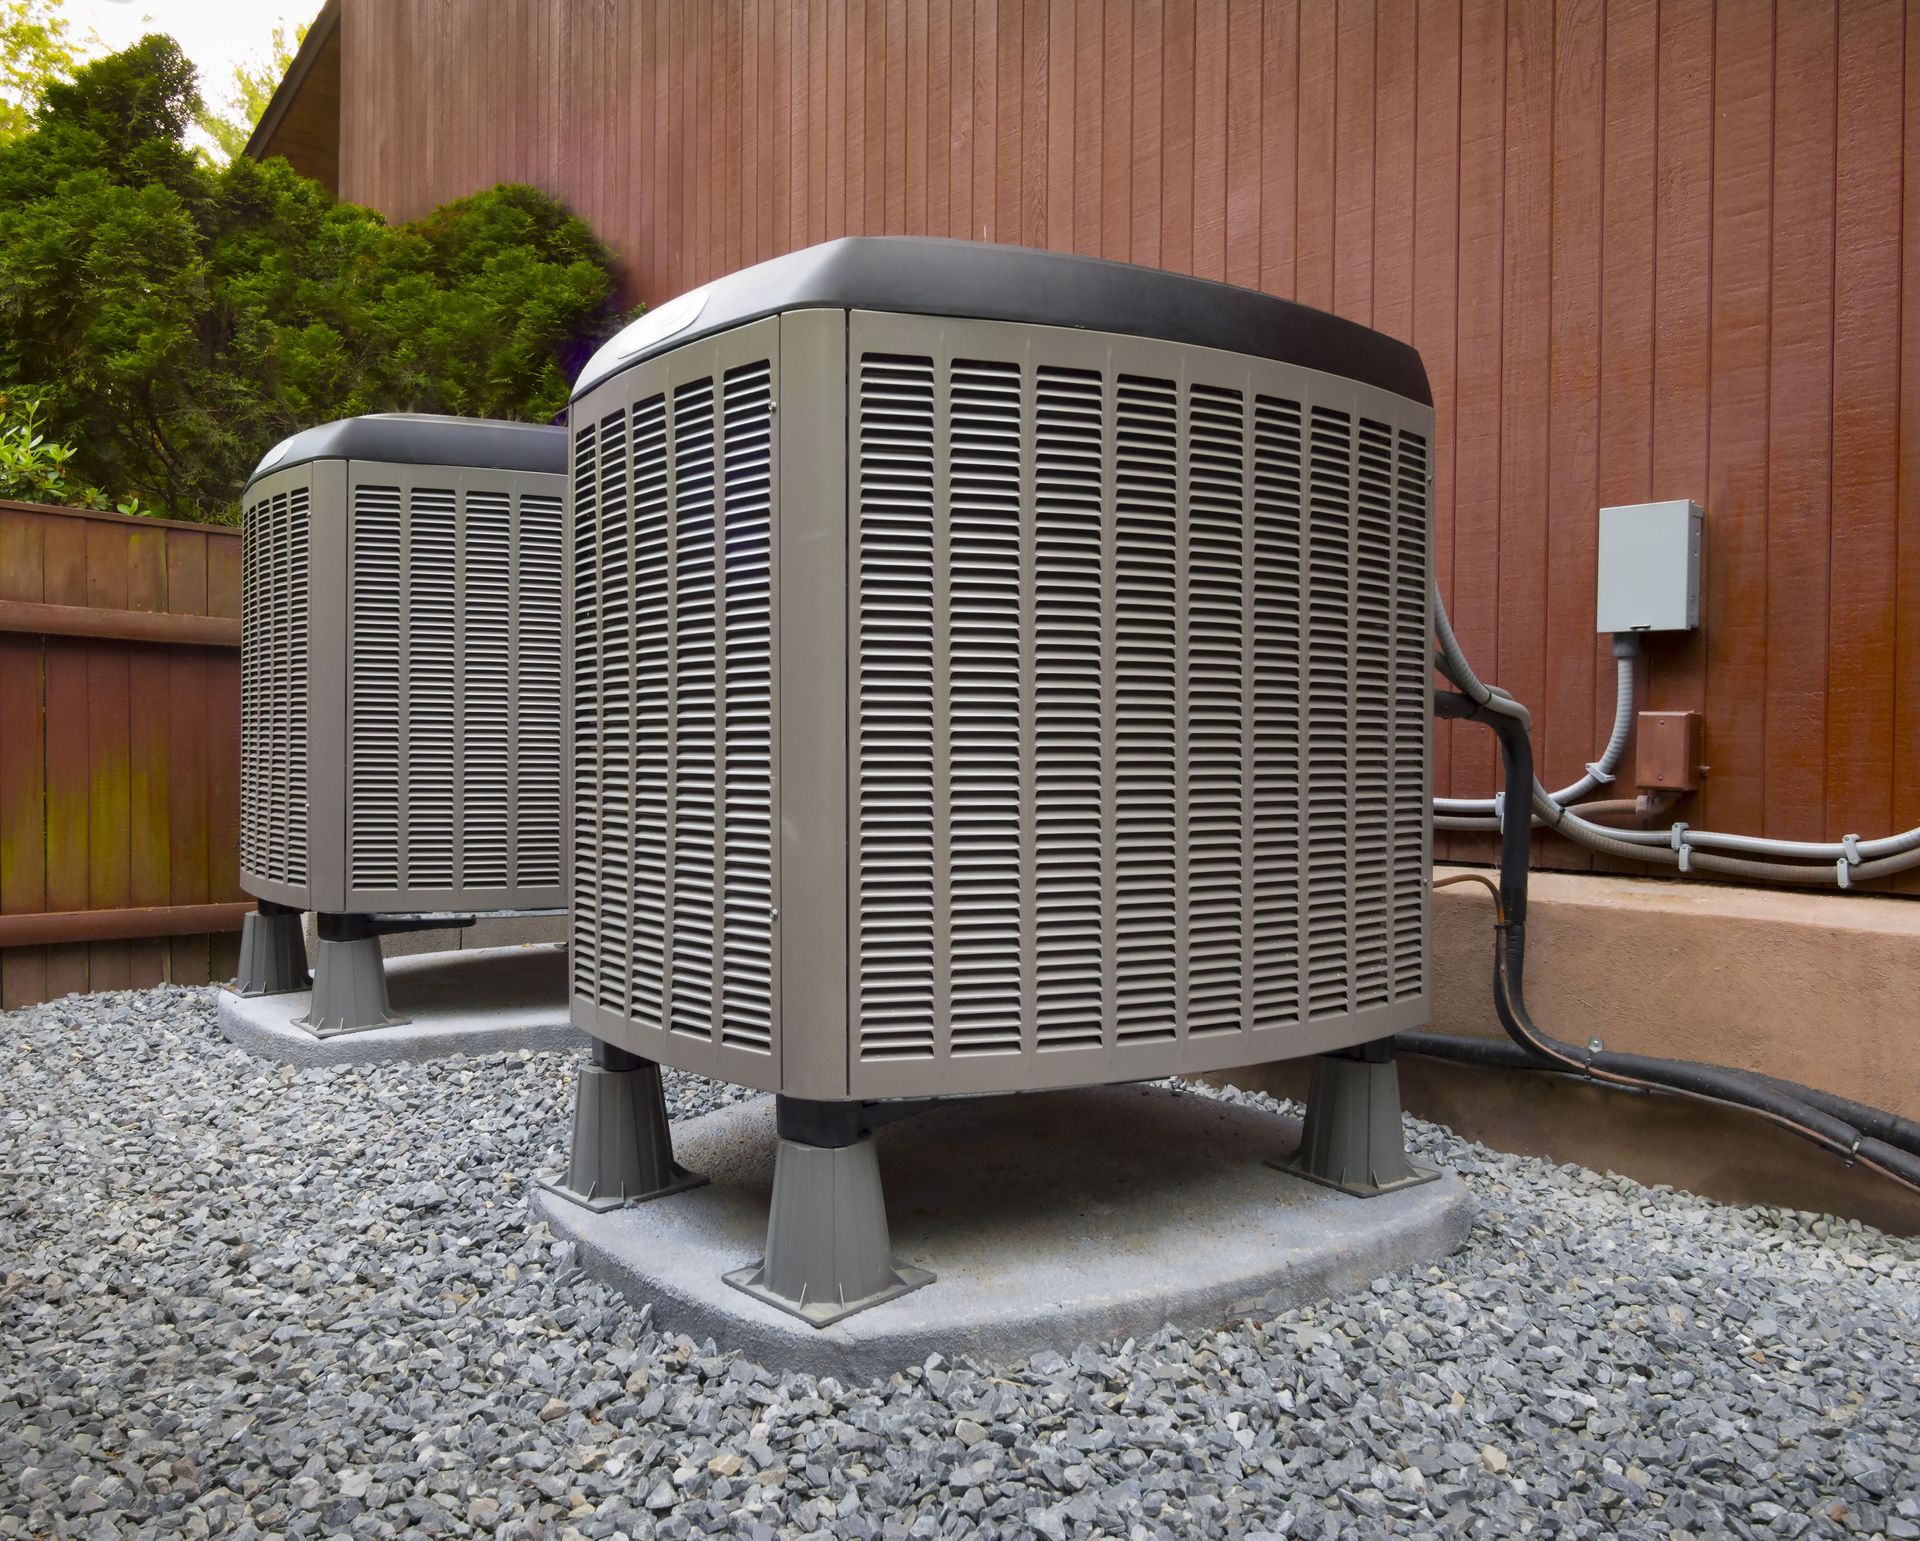 HVAC replacement cost